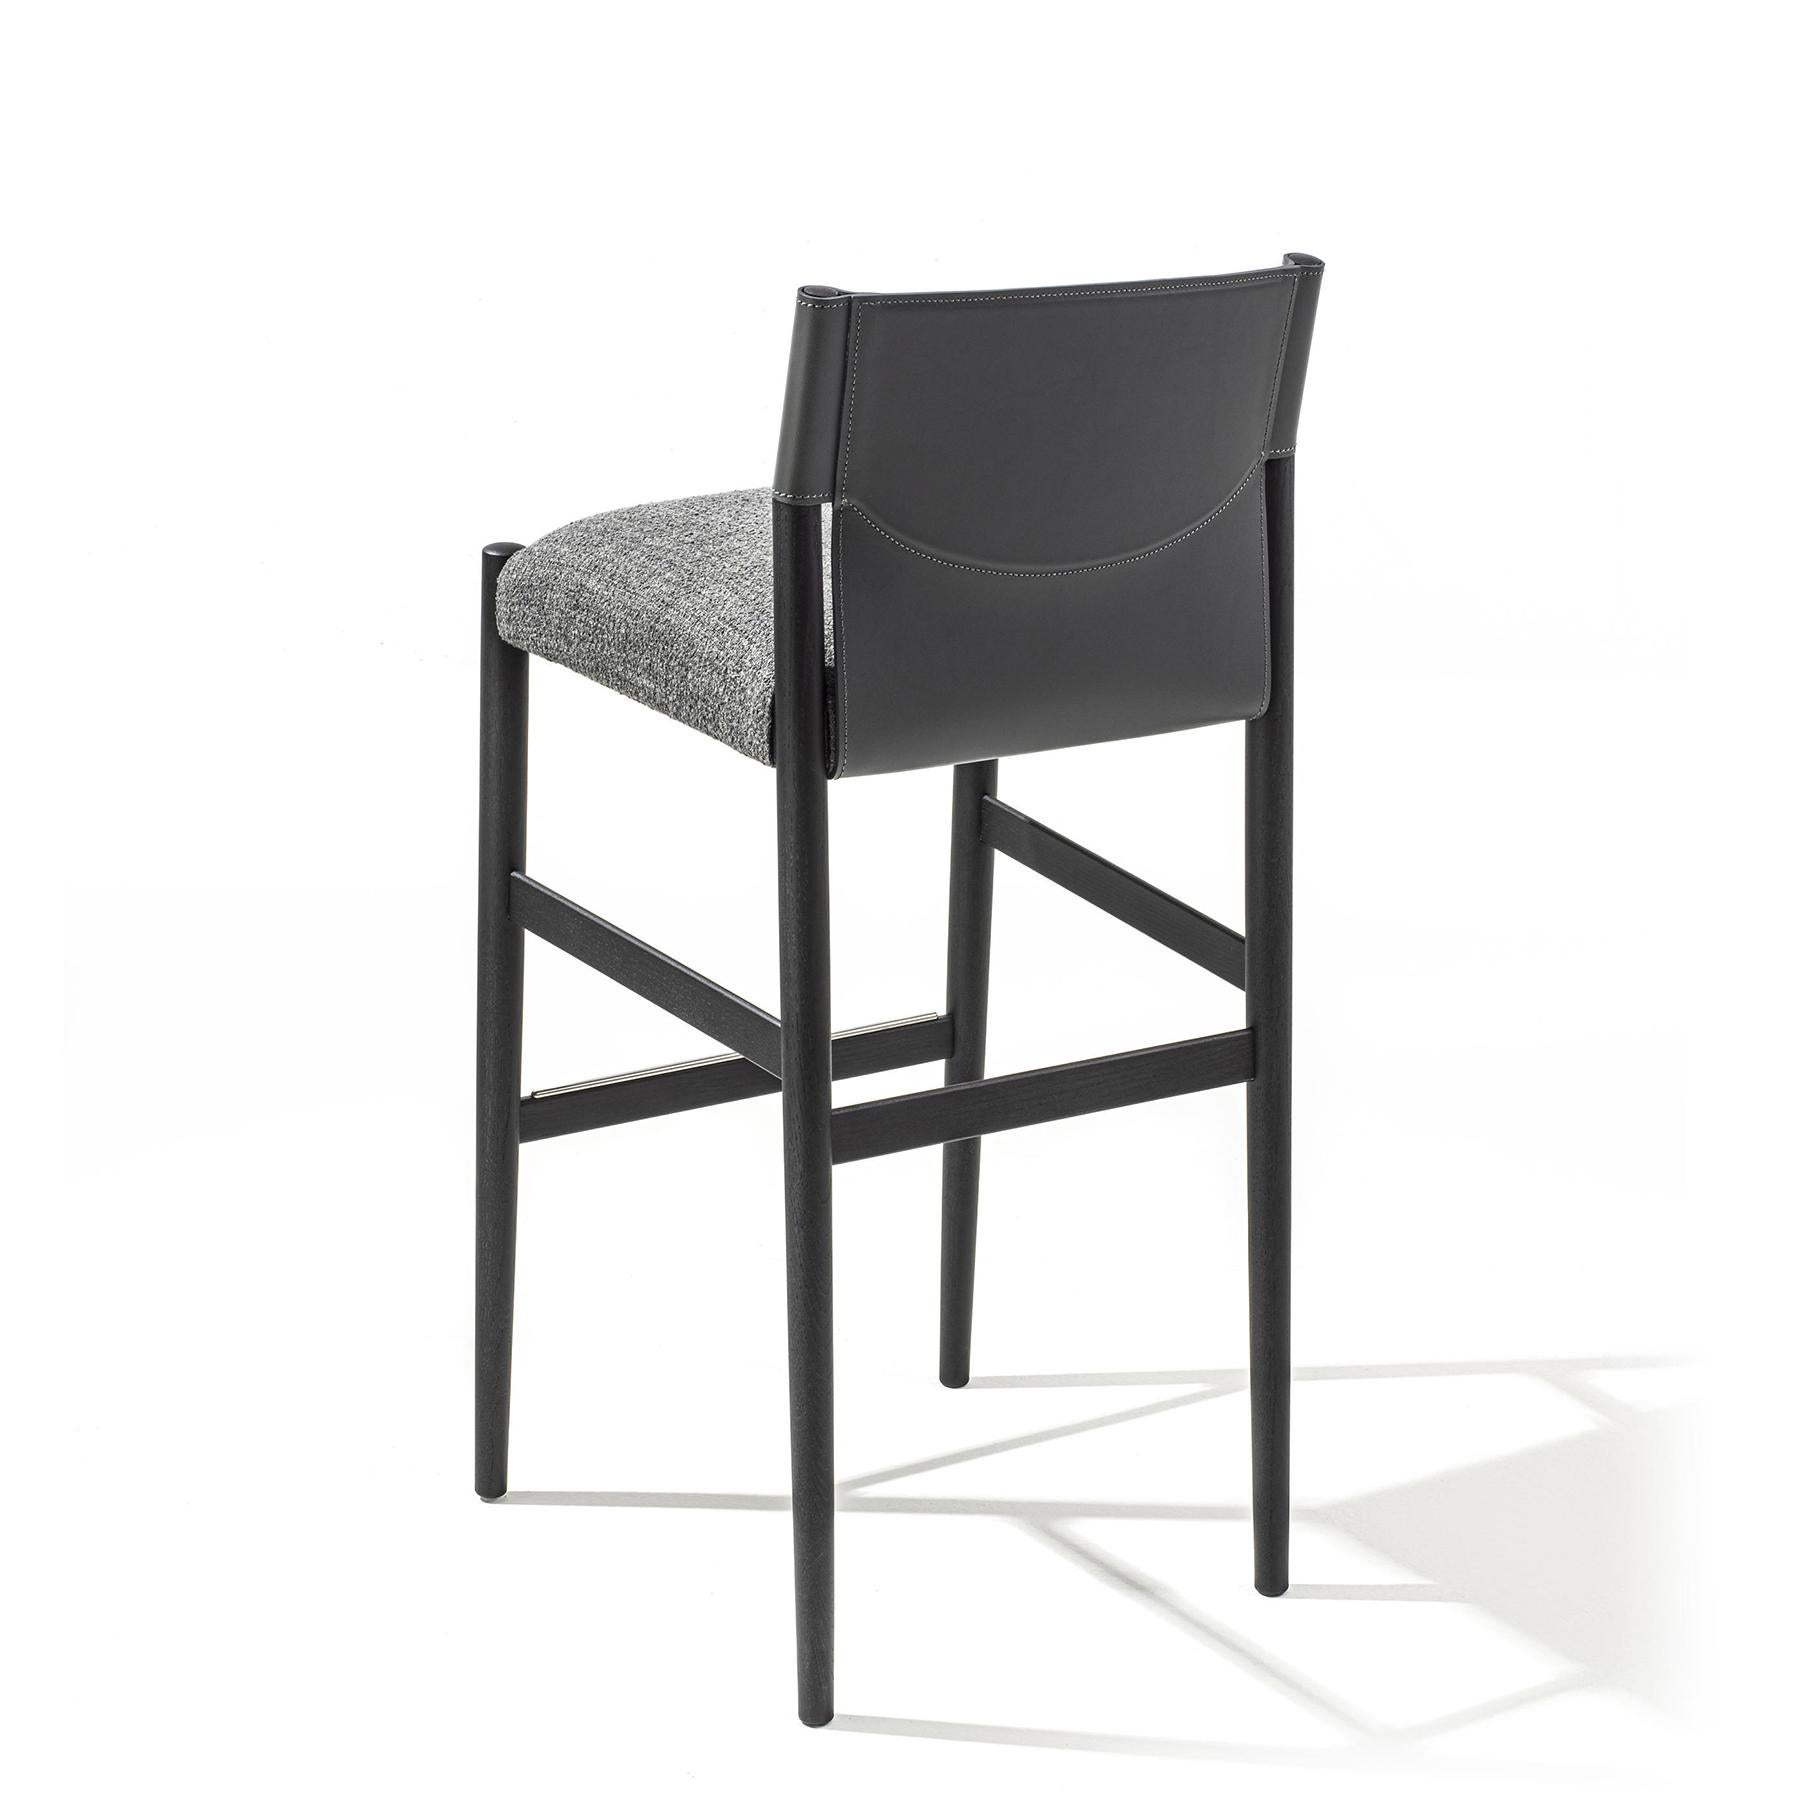 Bar stool Blackash with structure in solid ash
wood in blackened finish (stained). Seat upholstered
and covered with high quality fabric in grey finish (Cat. C), 
backrest in genuine black leather.